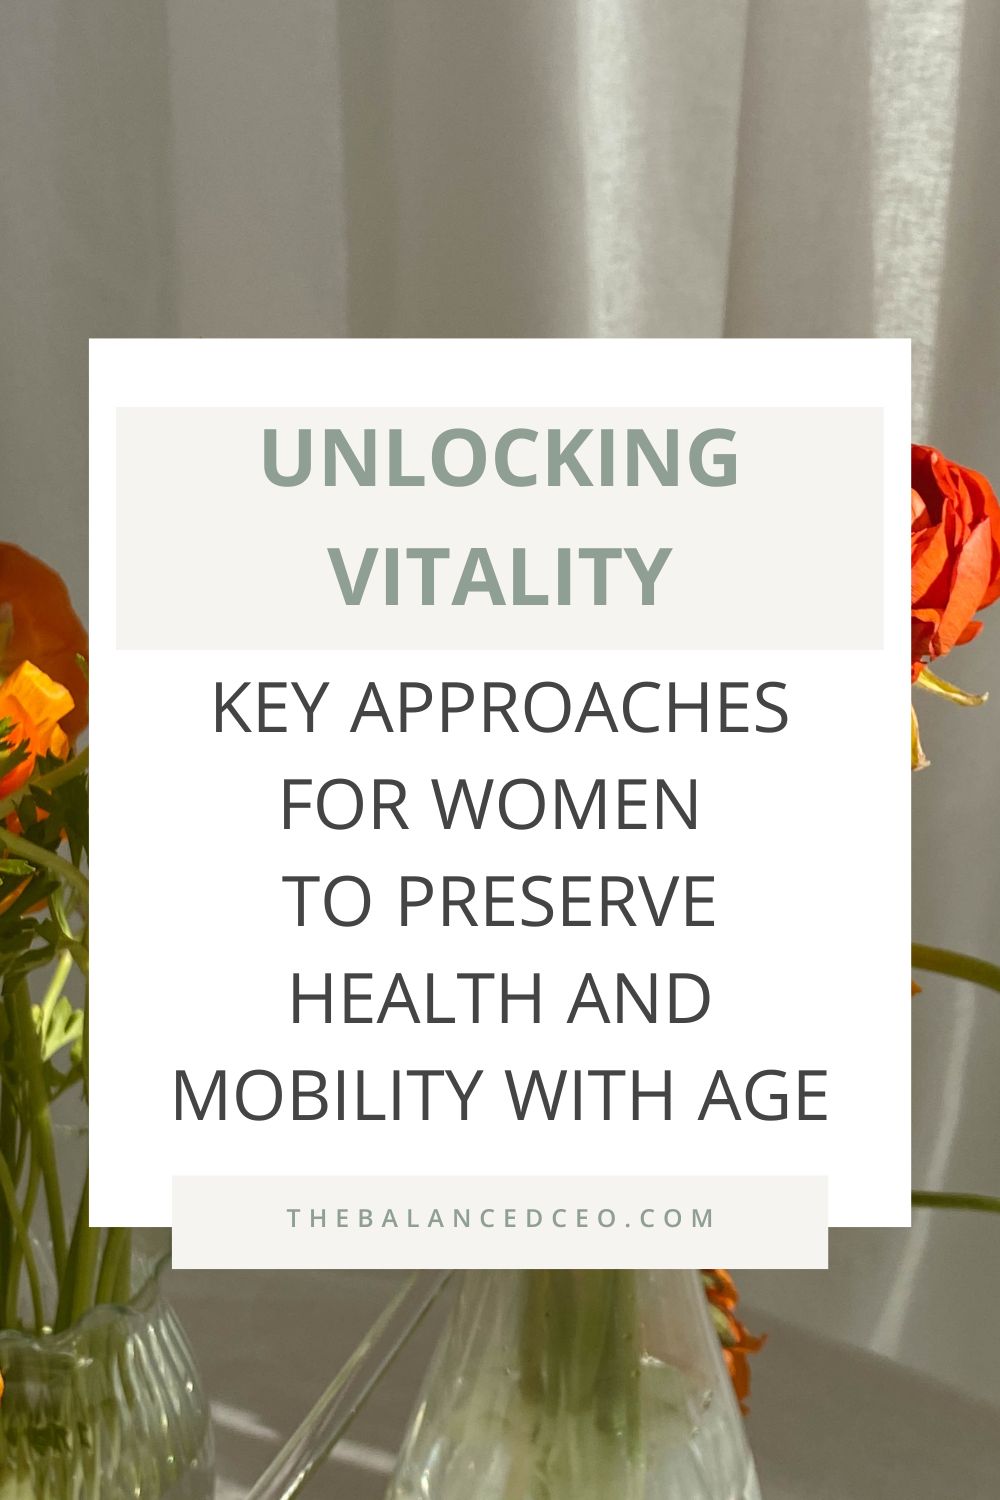 Unlocking Vitality: Key Approaches for Women to Preserve Health and Mobility with Age